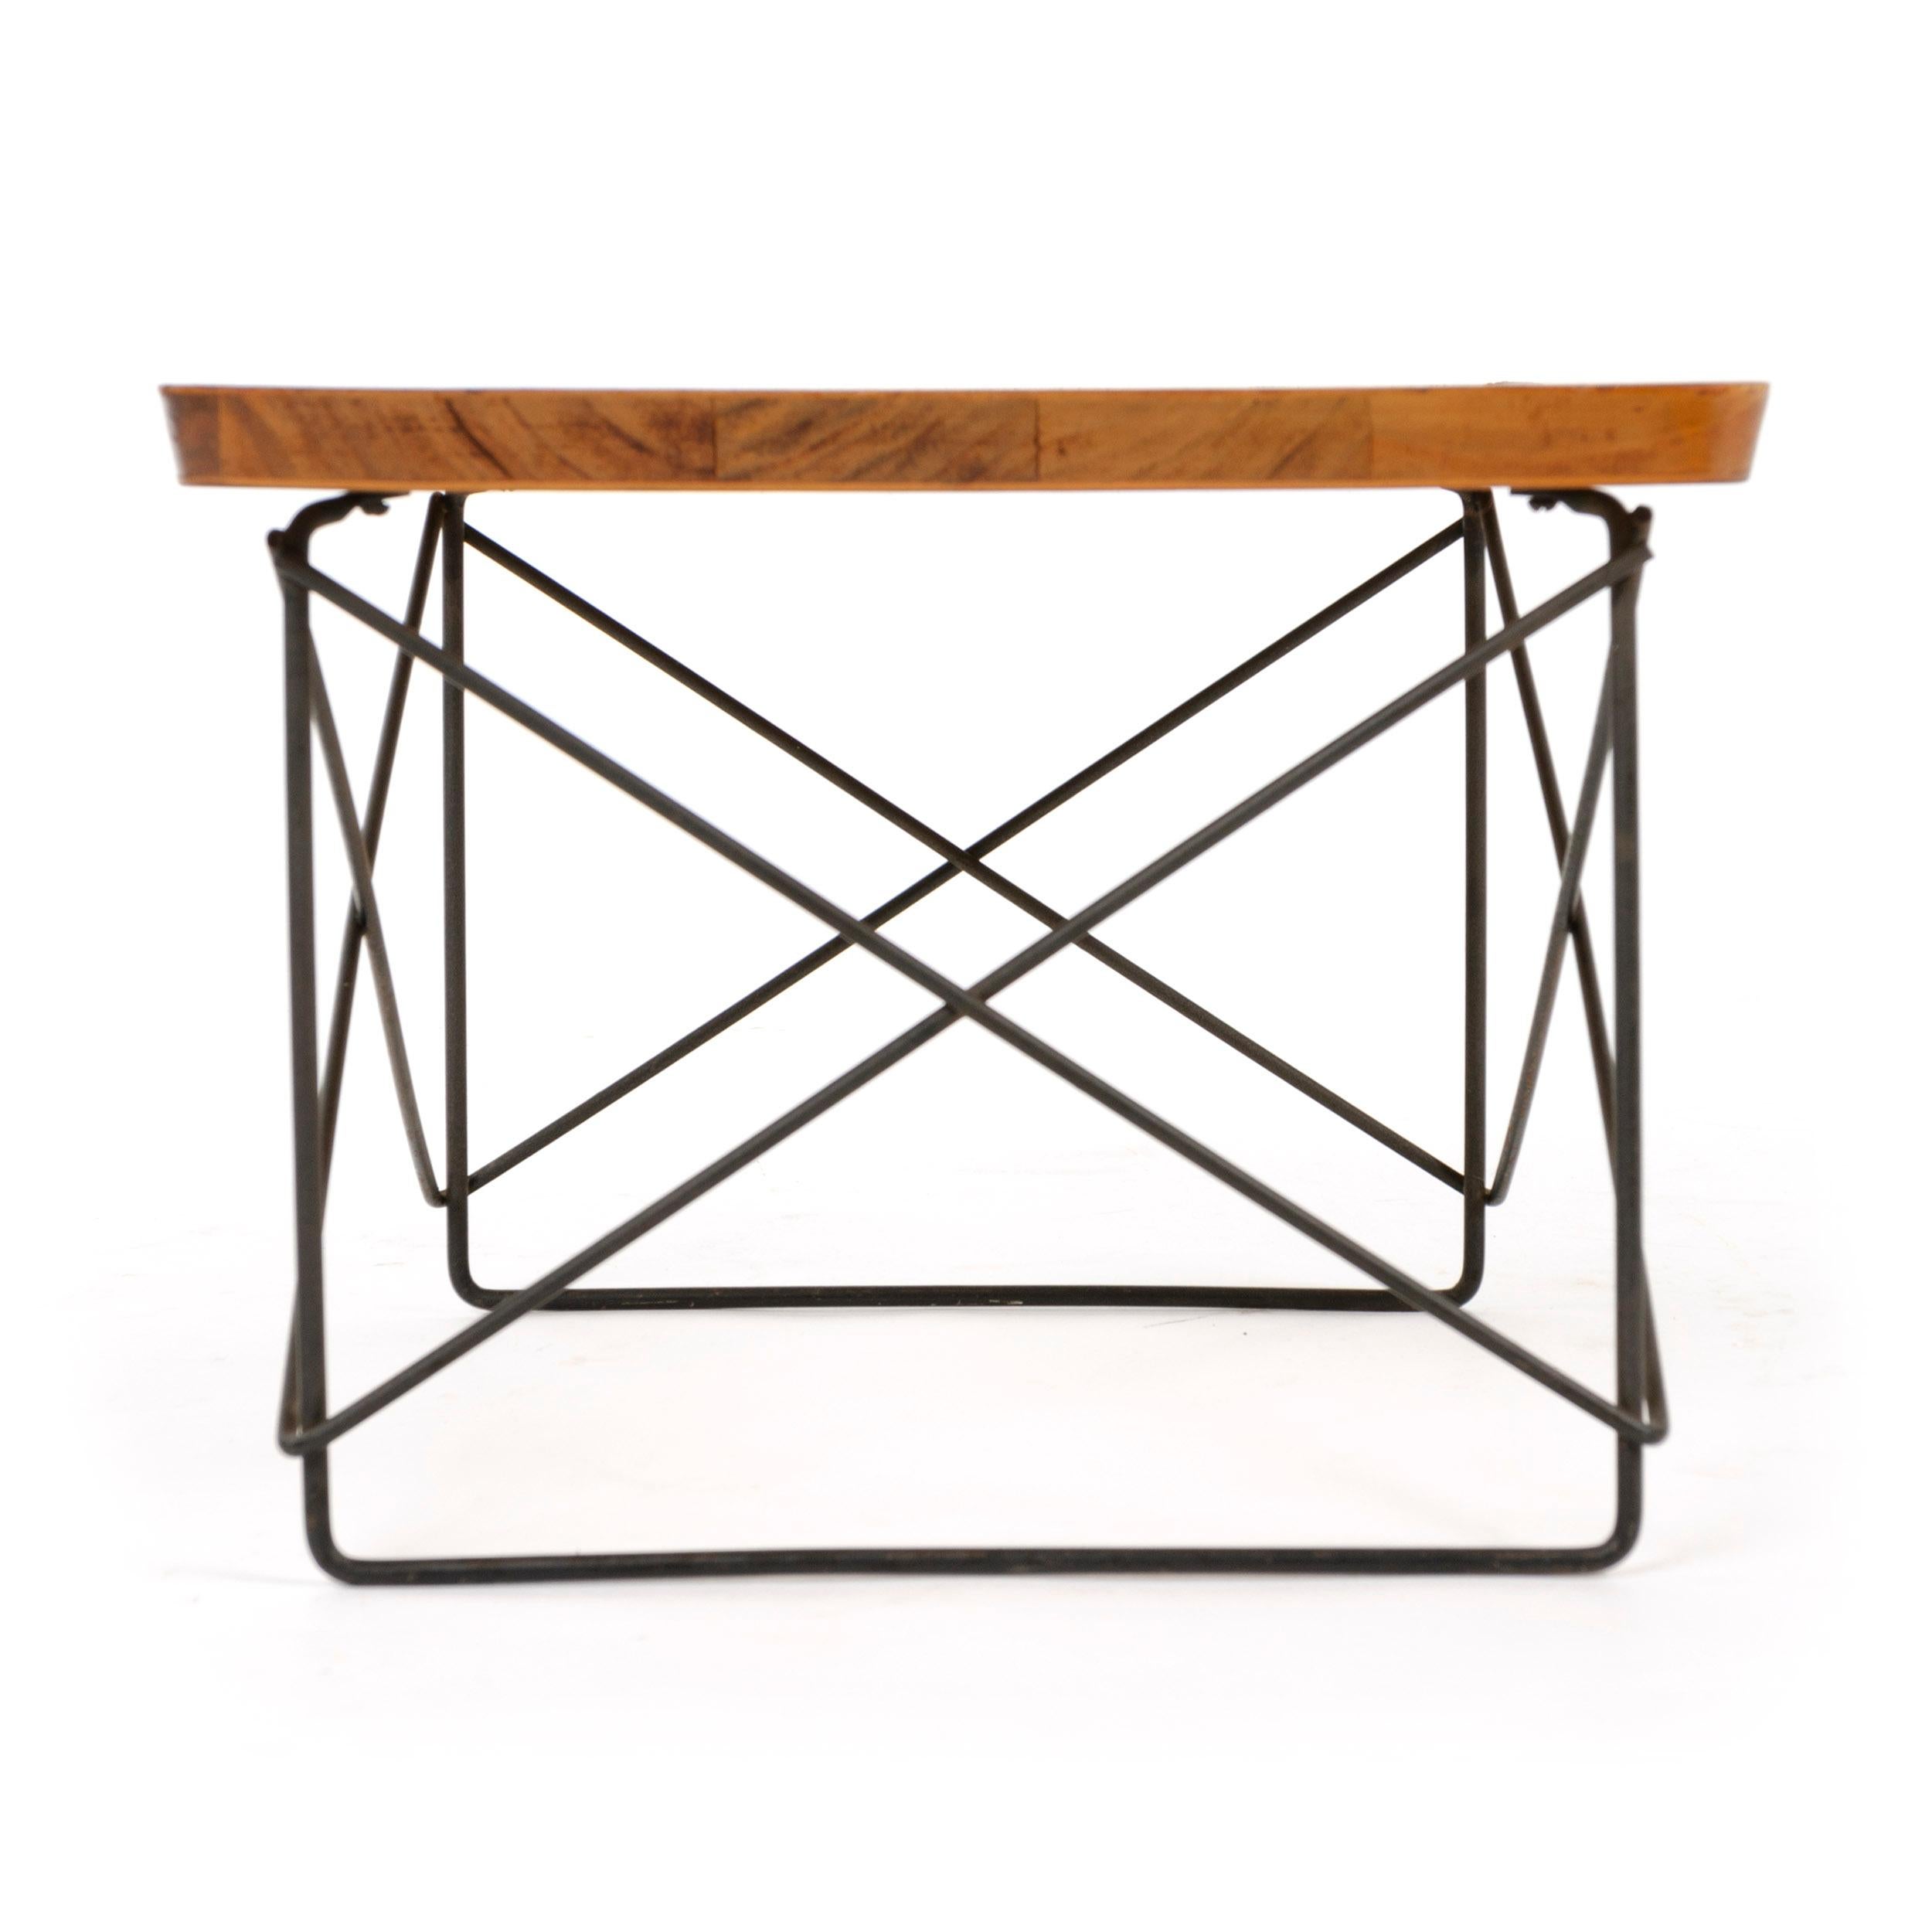 Mid-Century Modern 1950s 'LTR' Table by Charles and Ray Eames for Herman Miller